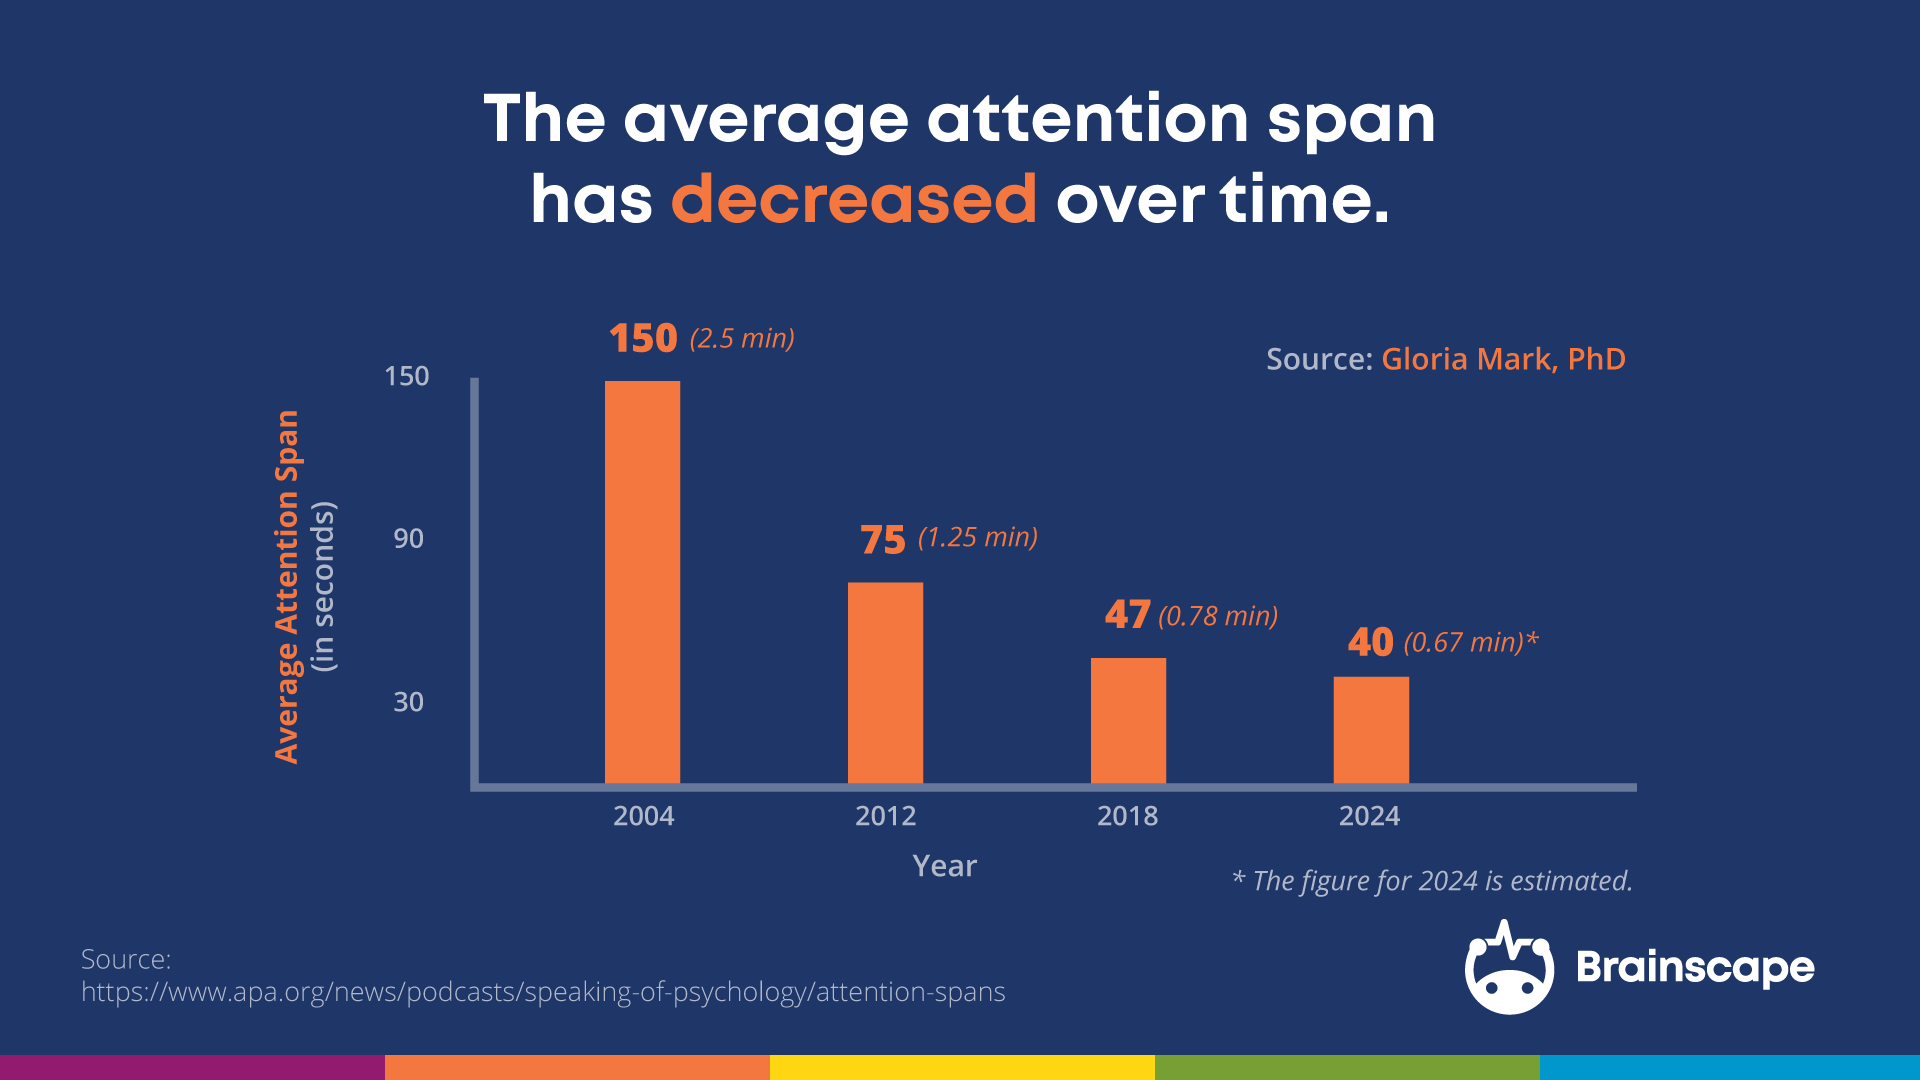 Graph showing the decrease in average attention span over time